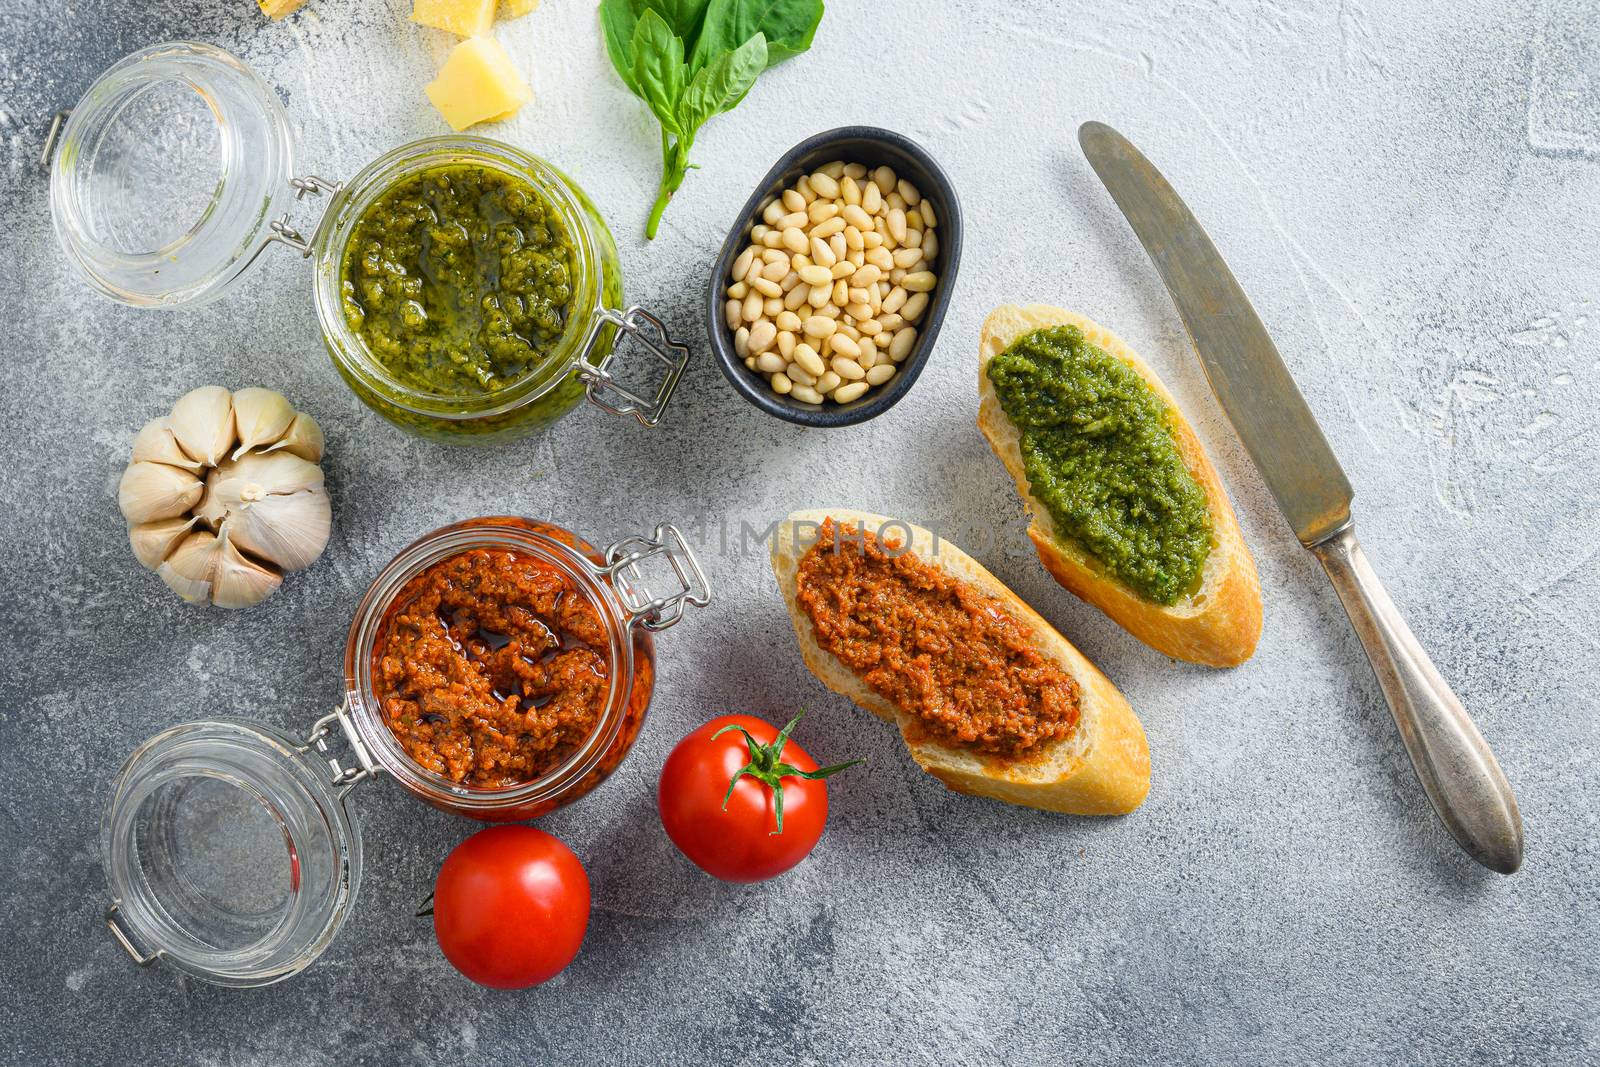 Glass jars with red and green pesto and cooking italian recipe ingredients Parmesan cheese, basil leaves, pine nuts, olive oil, garlic, salt, tomatoes breakfast panini with sauce top view on grey concrete surface space for text.